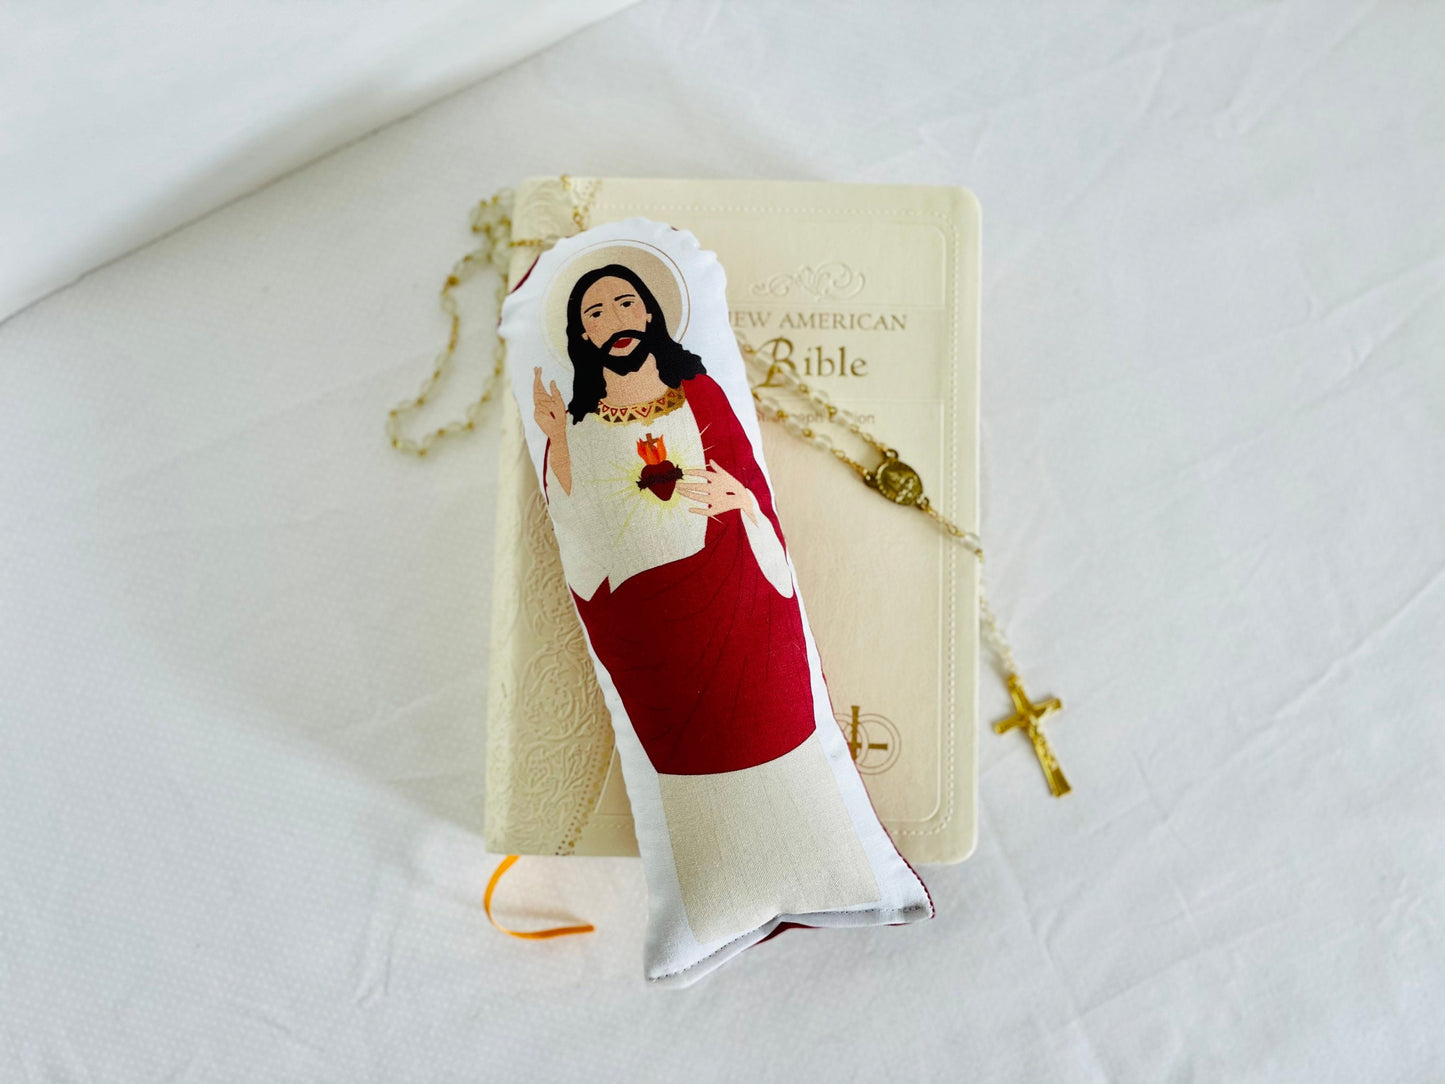 our father prayer doll